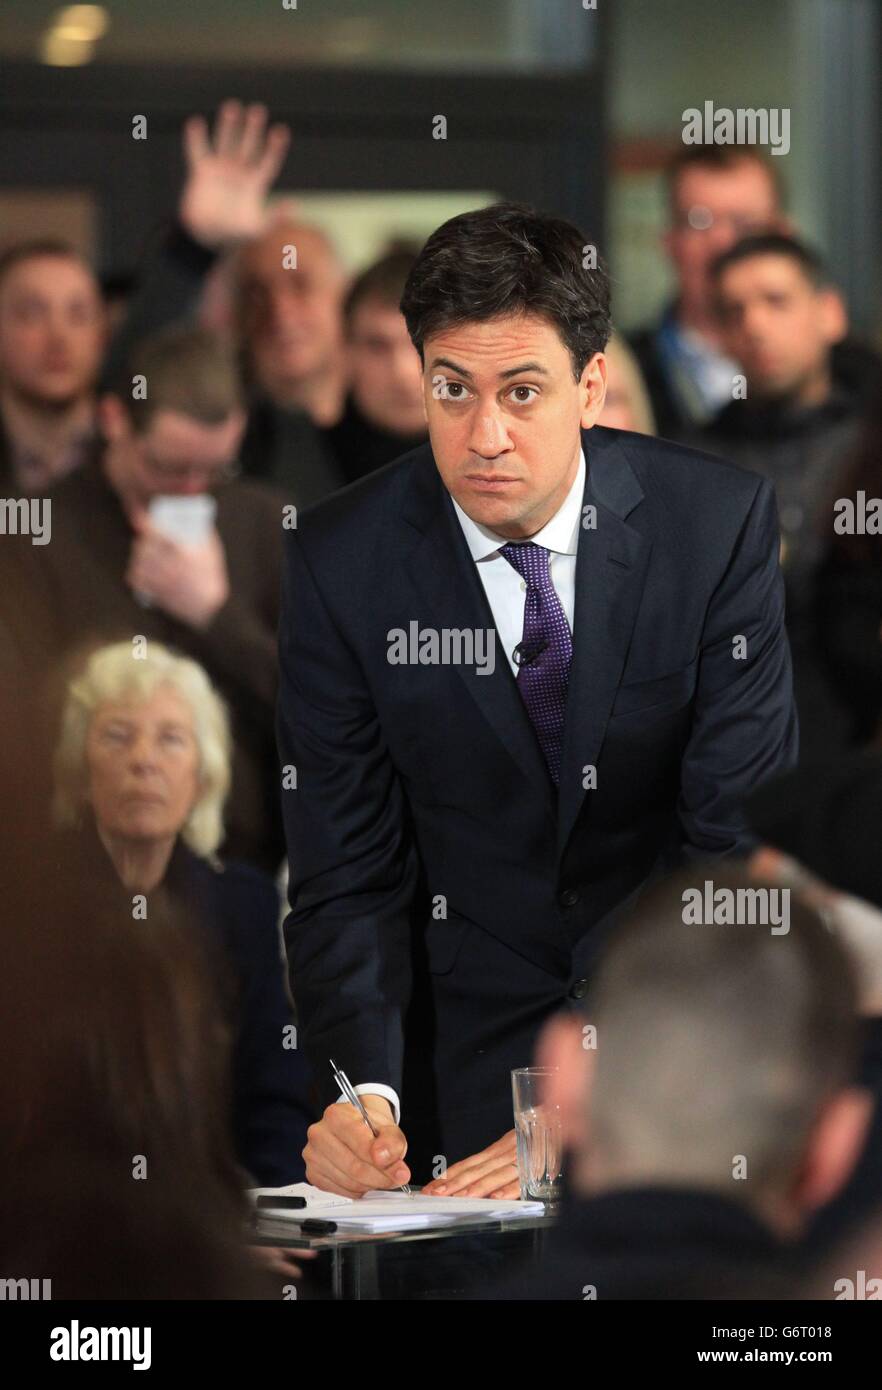 Labour Leader Ed Miliband delivers a speech at the Forum in Wythenshawe, Cheshire, as he joins the campaign trail for the Wythenshawe and Sale East by-election that's taking place on February 13. Stock Photo